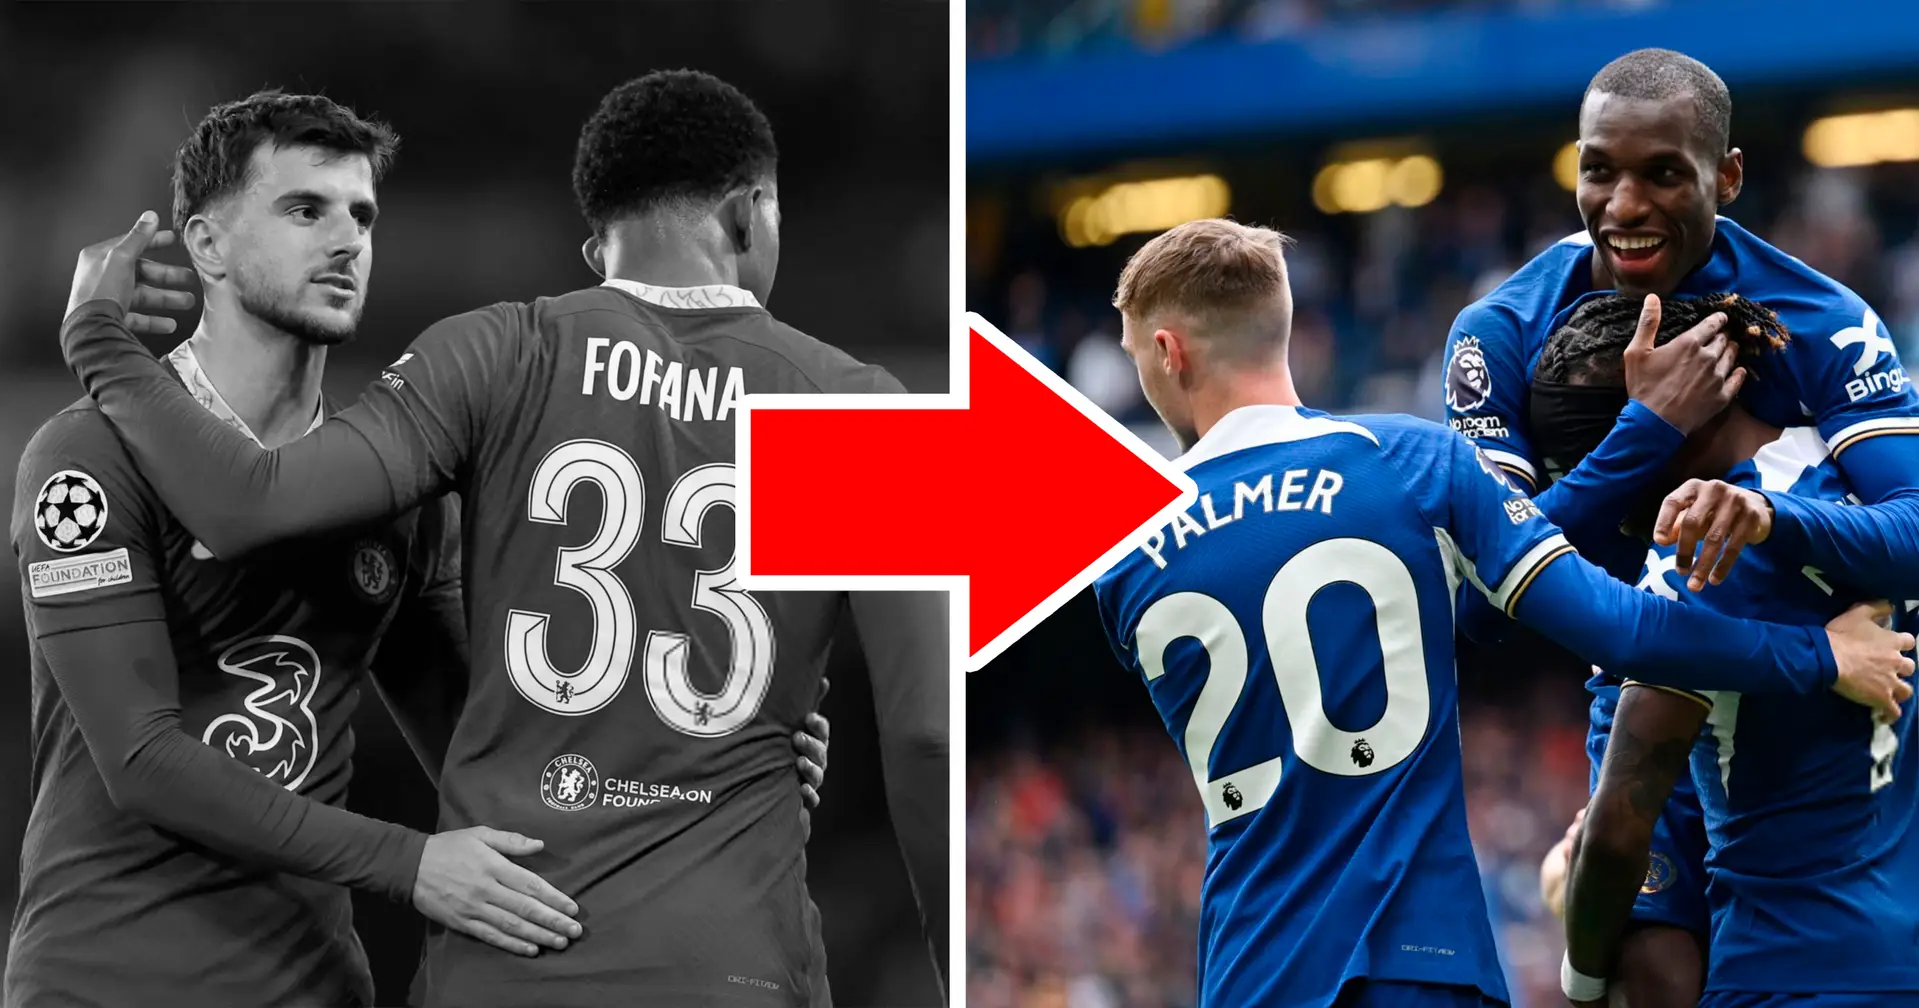 Chelsea fan compares this season to the last one - names key points of the Blues' improvement since then